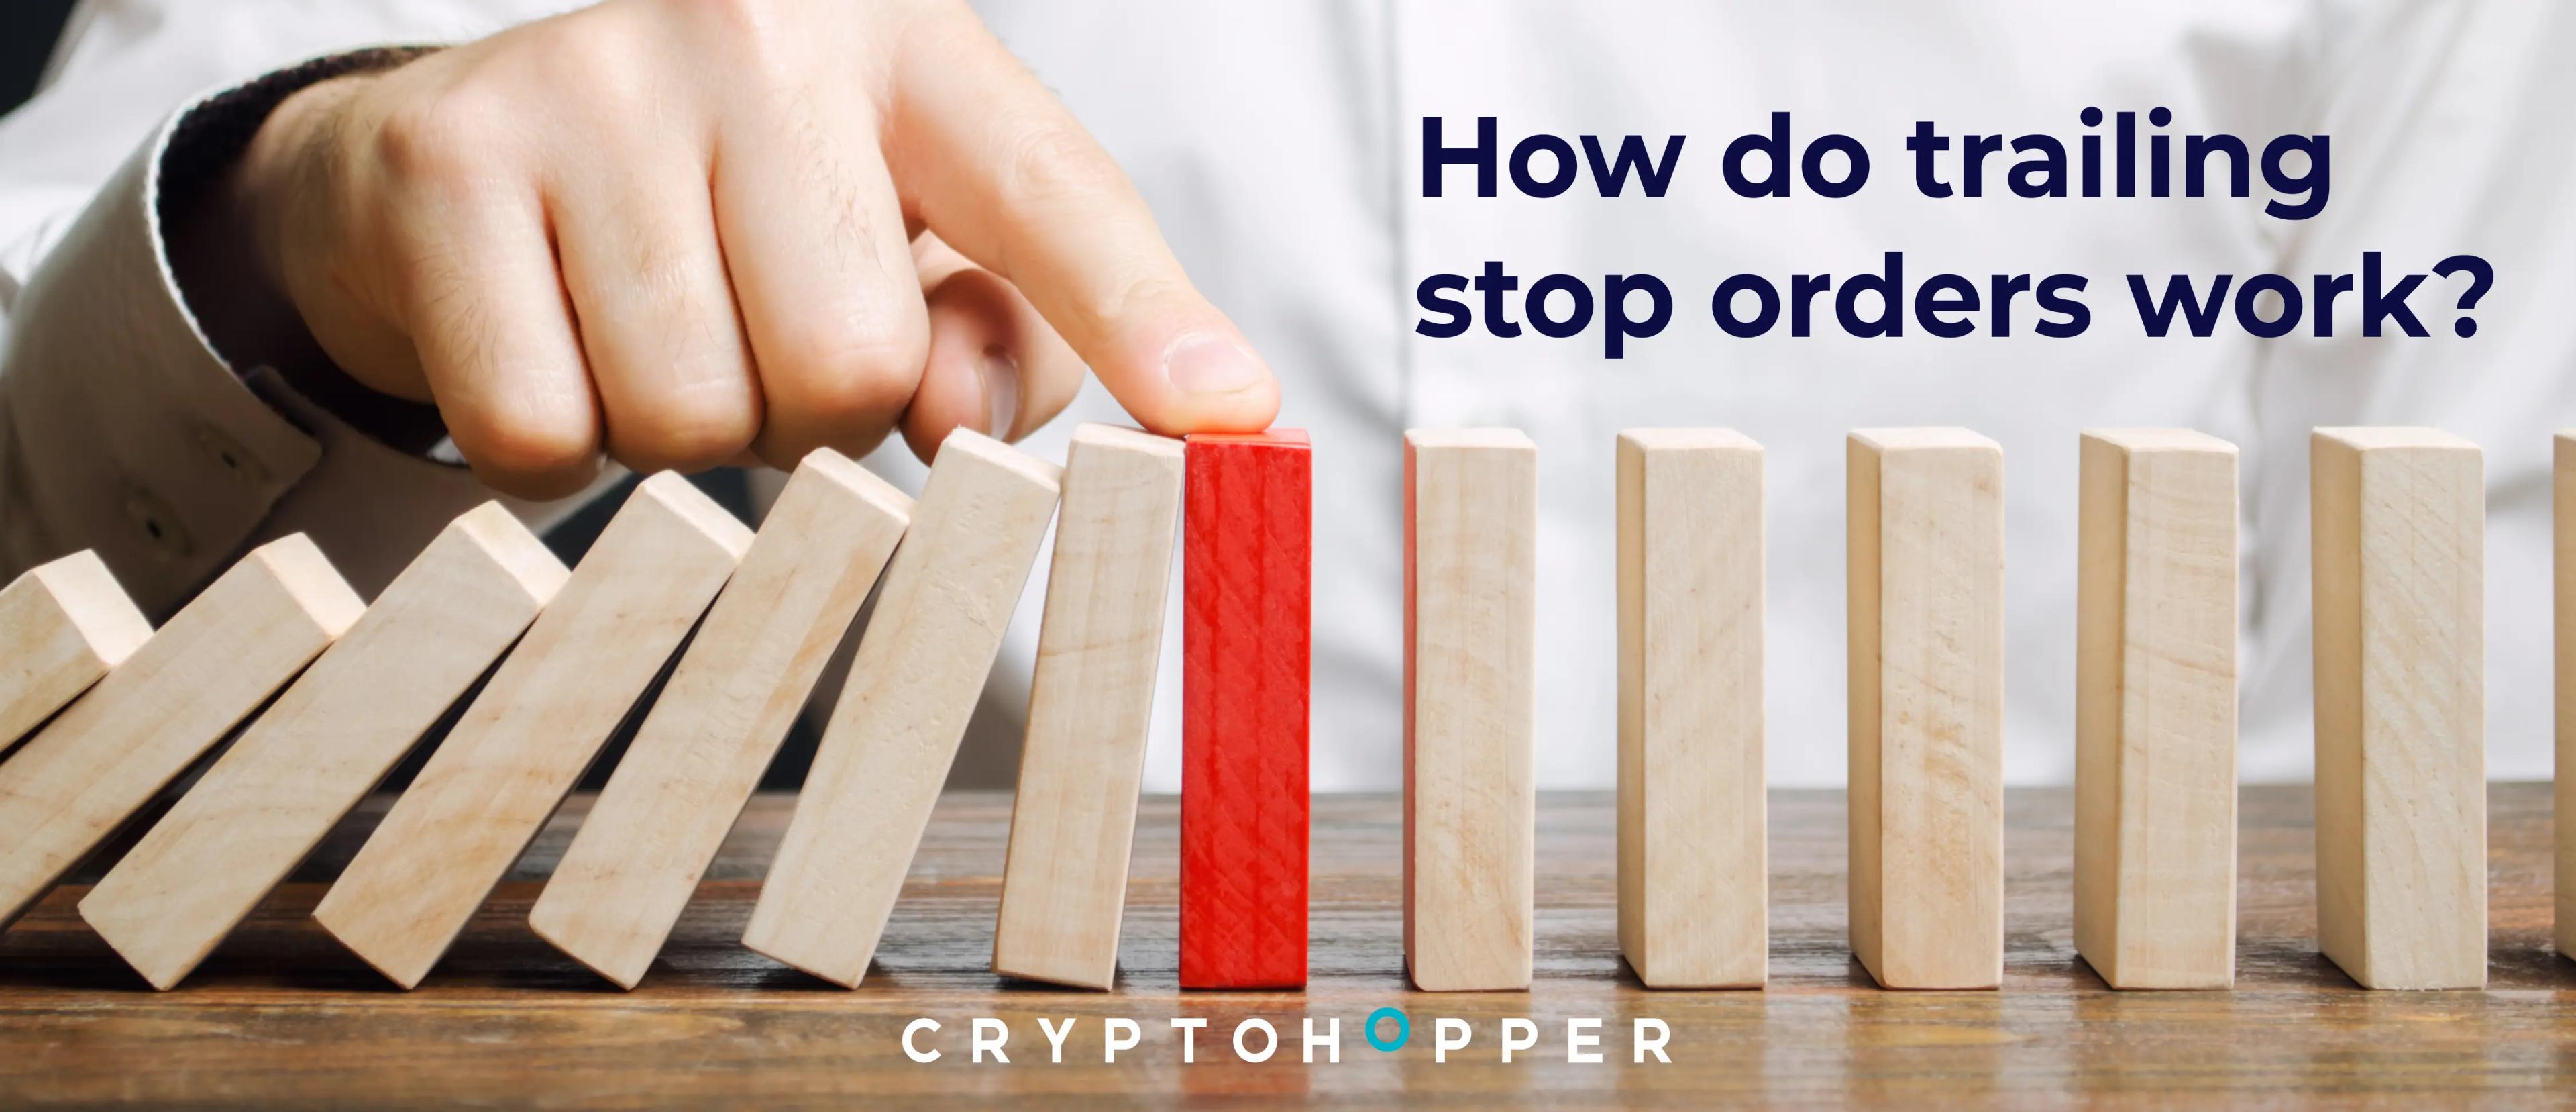 How do trailing stop orders work